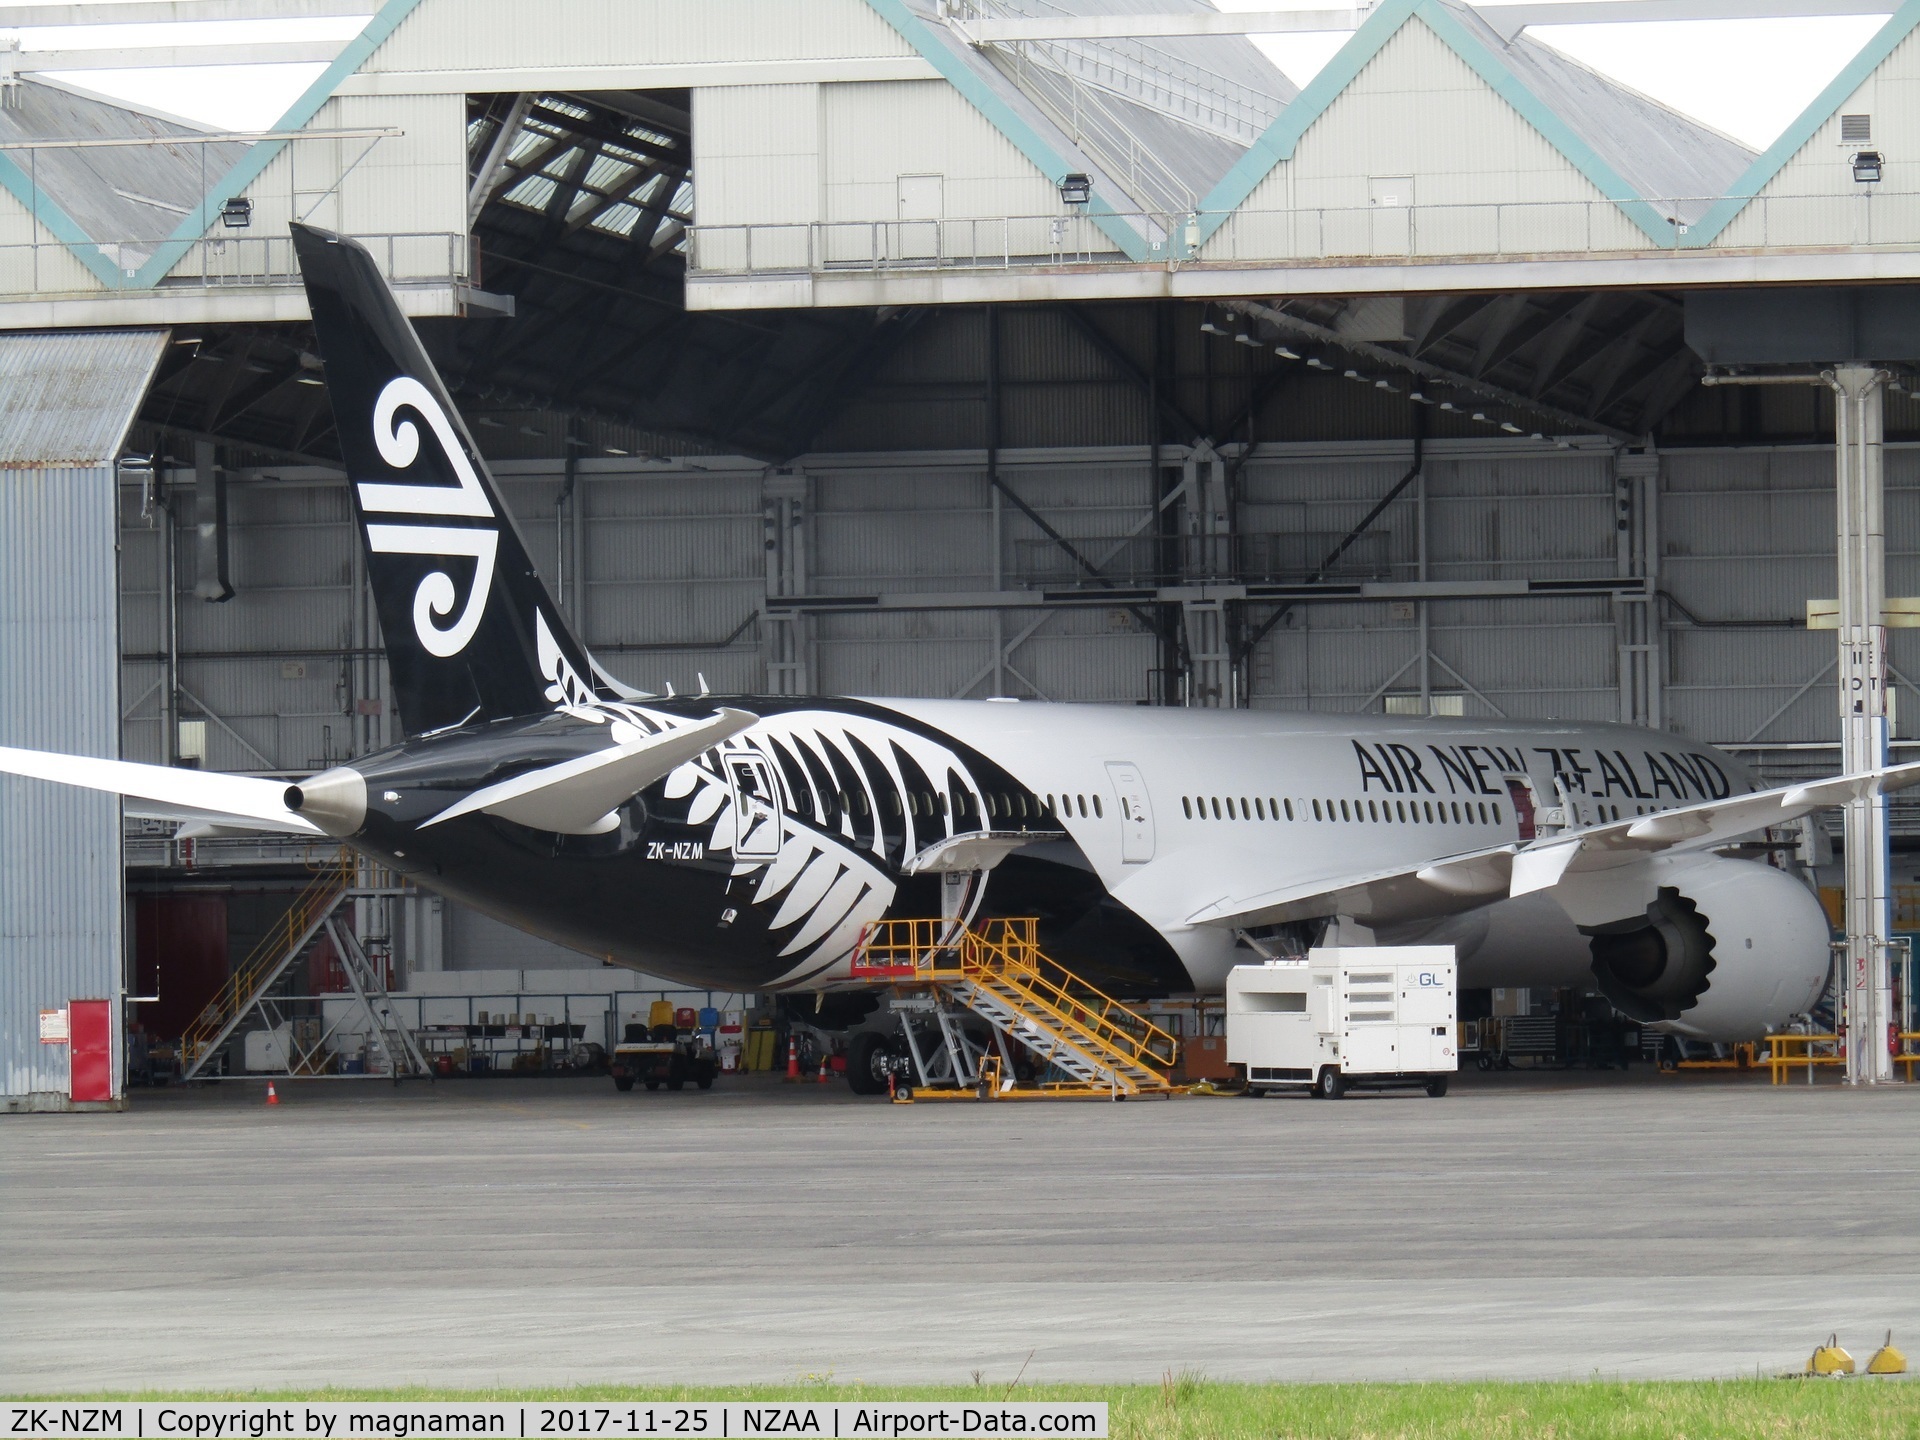 ZK-NZM, 2017 Boeing 787-9 Dreamliner Dreamliner C/N 38180, after delivery and before first commercial flight for Air NZ